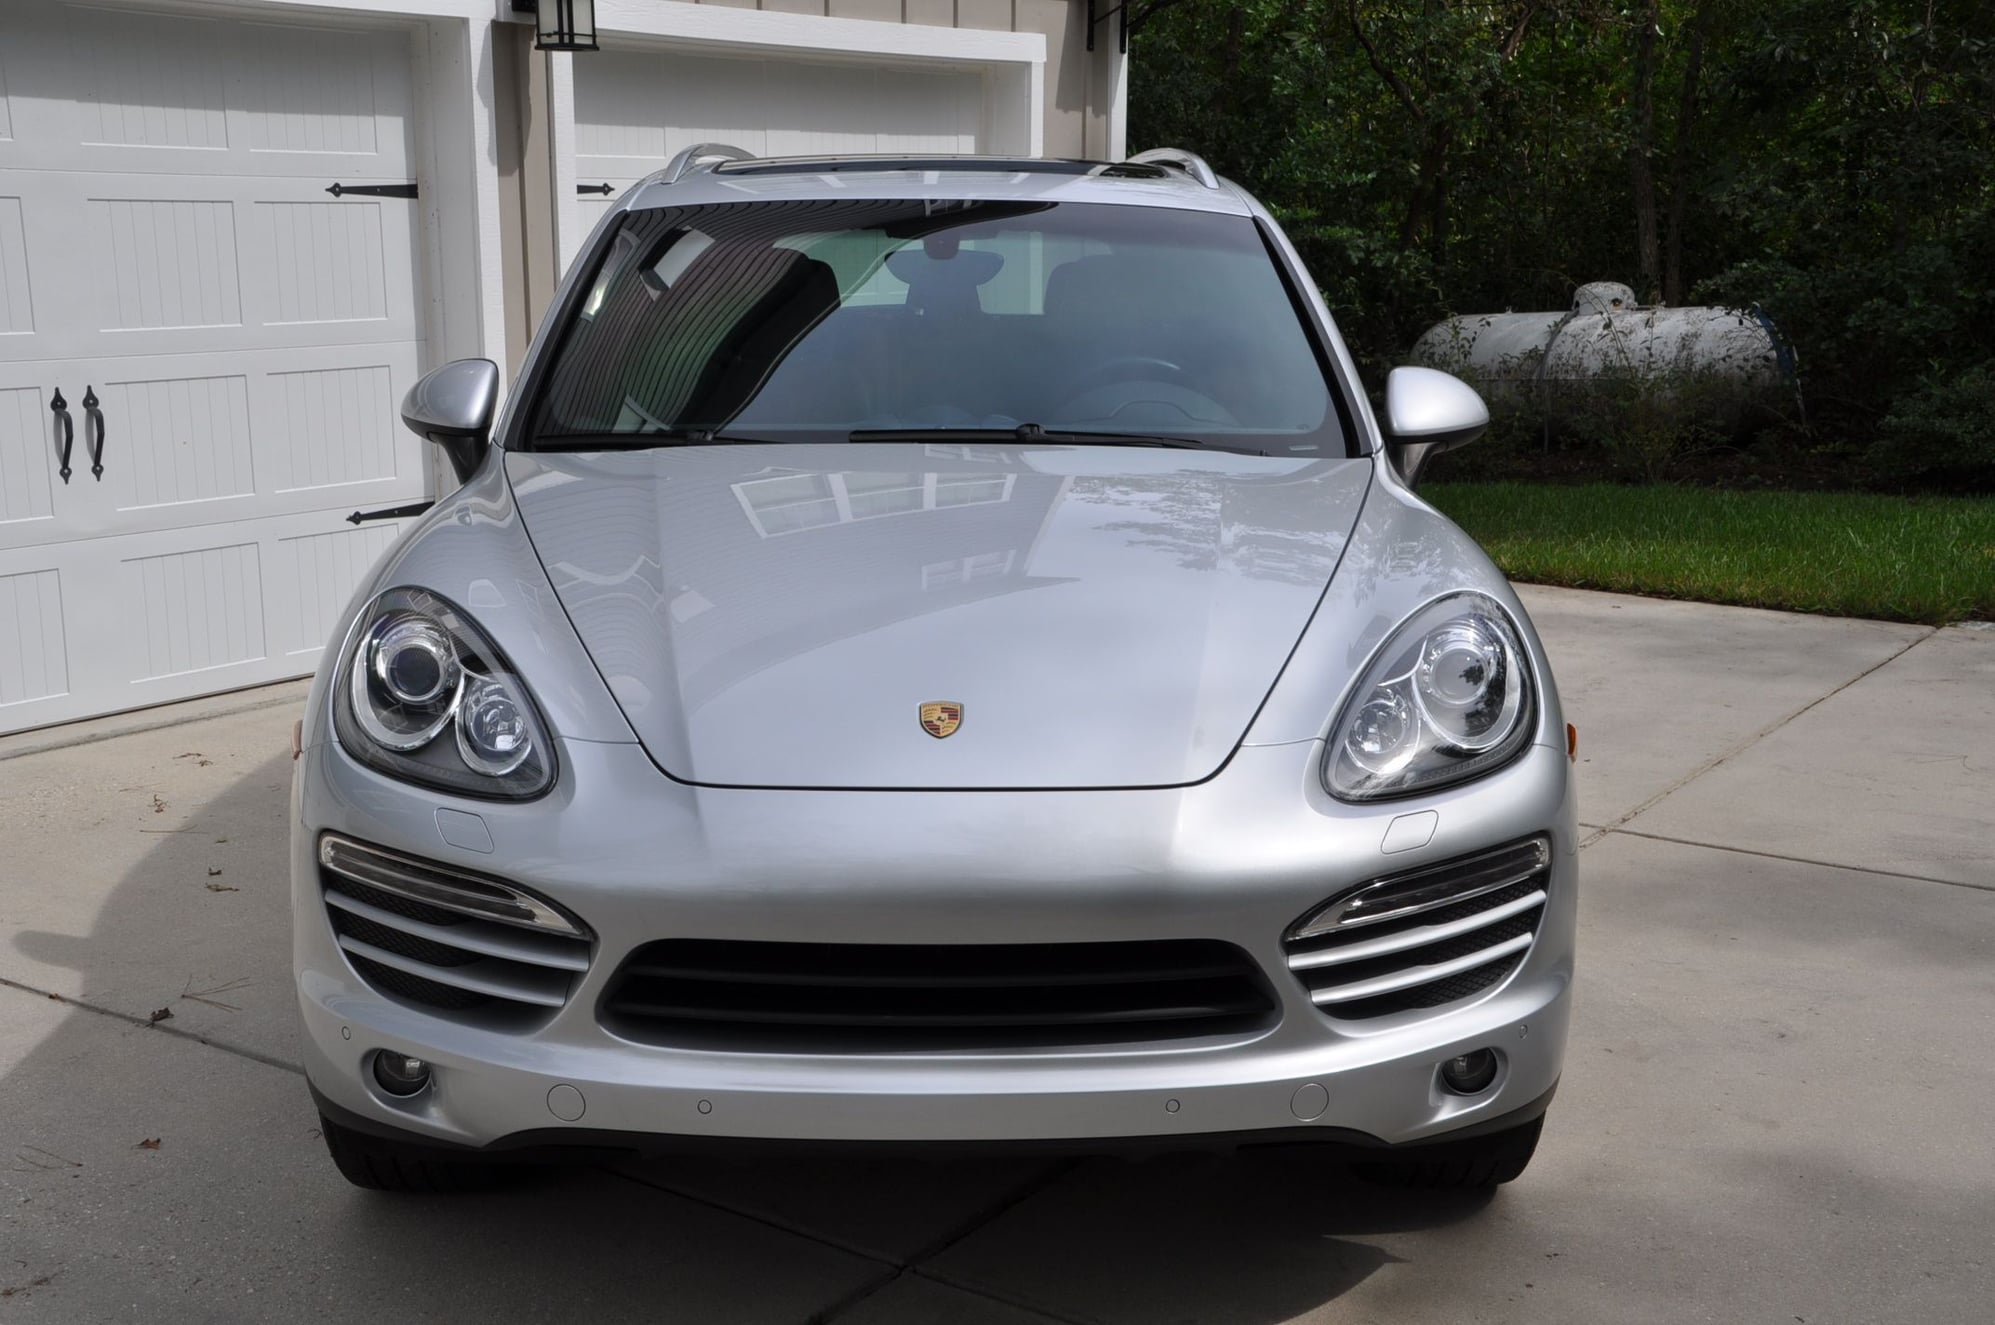 2013 Porsche Cayenne - 2013 Porsche Cayenne - rare manual transmission 6MT - Used - VIN WP1AA2A20DLA01259 - 42,970 Miles - 6 cyl - AWD - Manual - SUV - Silver - Wilmington, NC 28411, United States